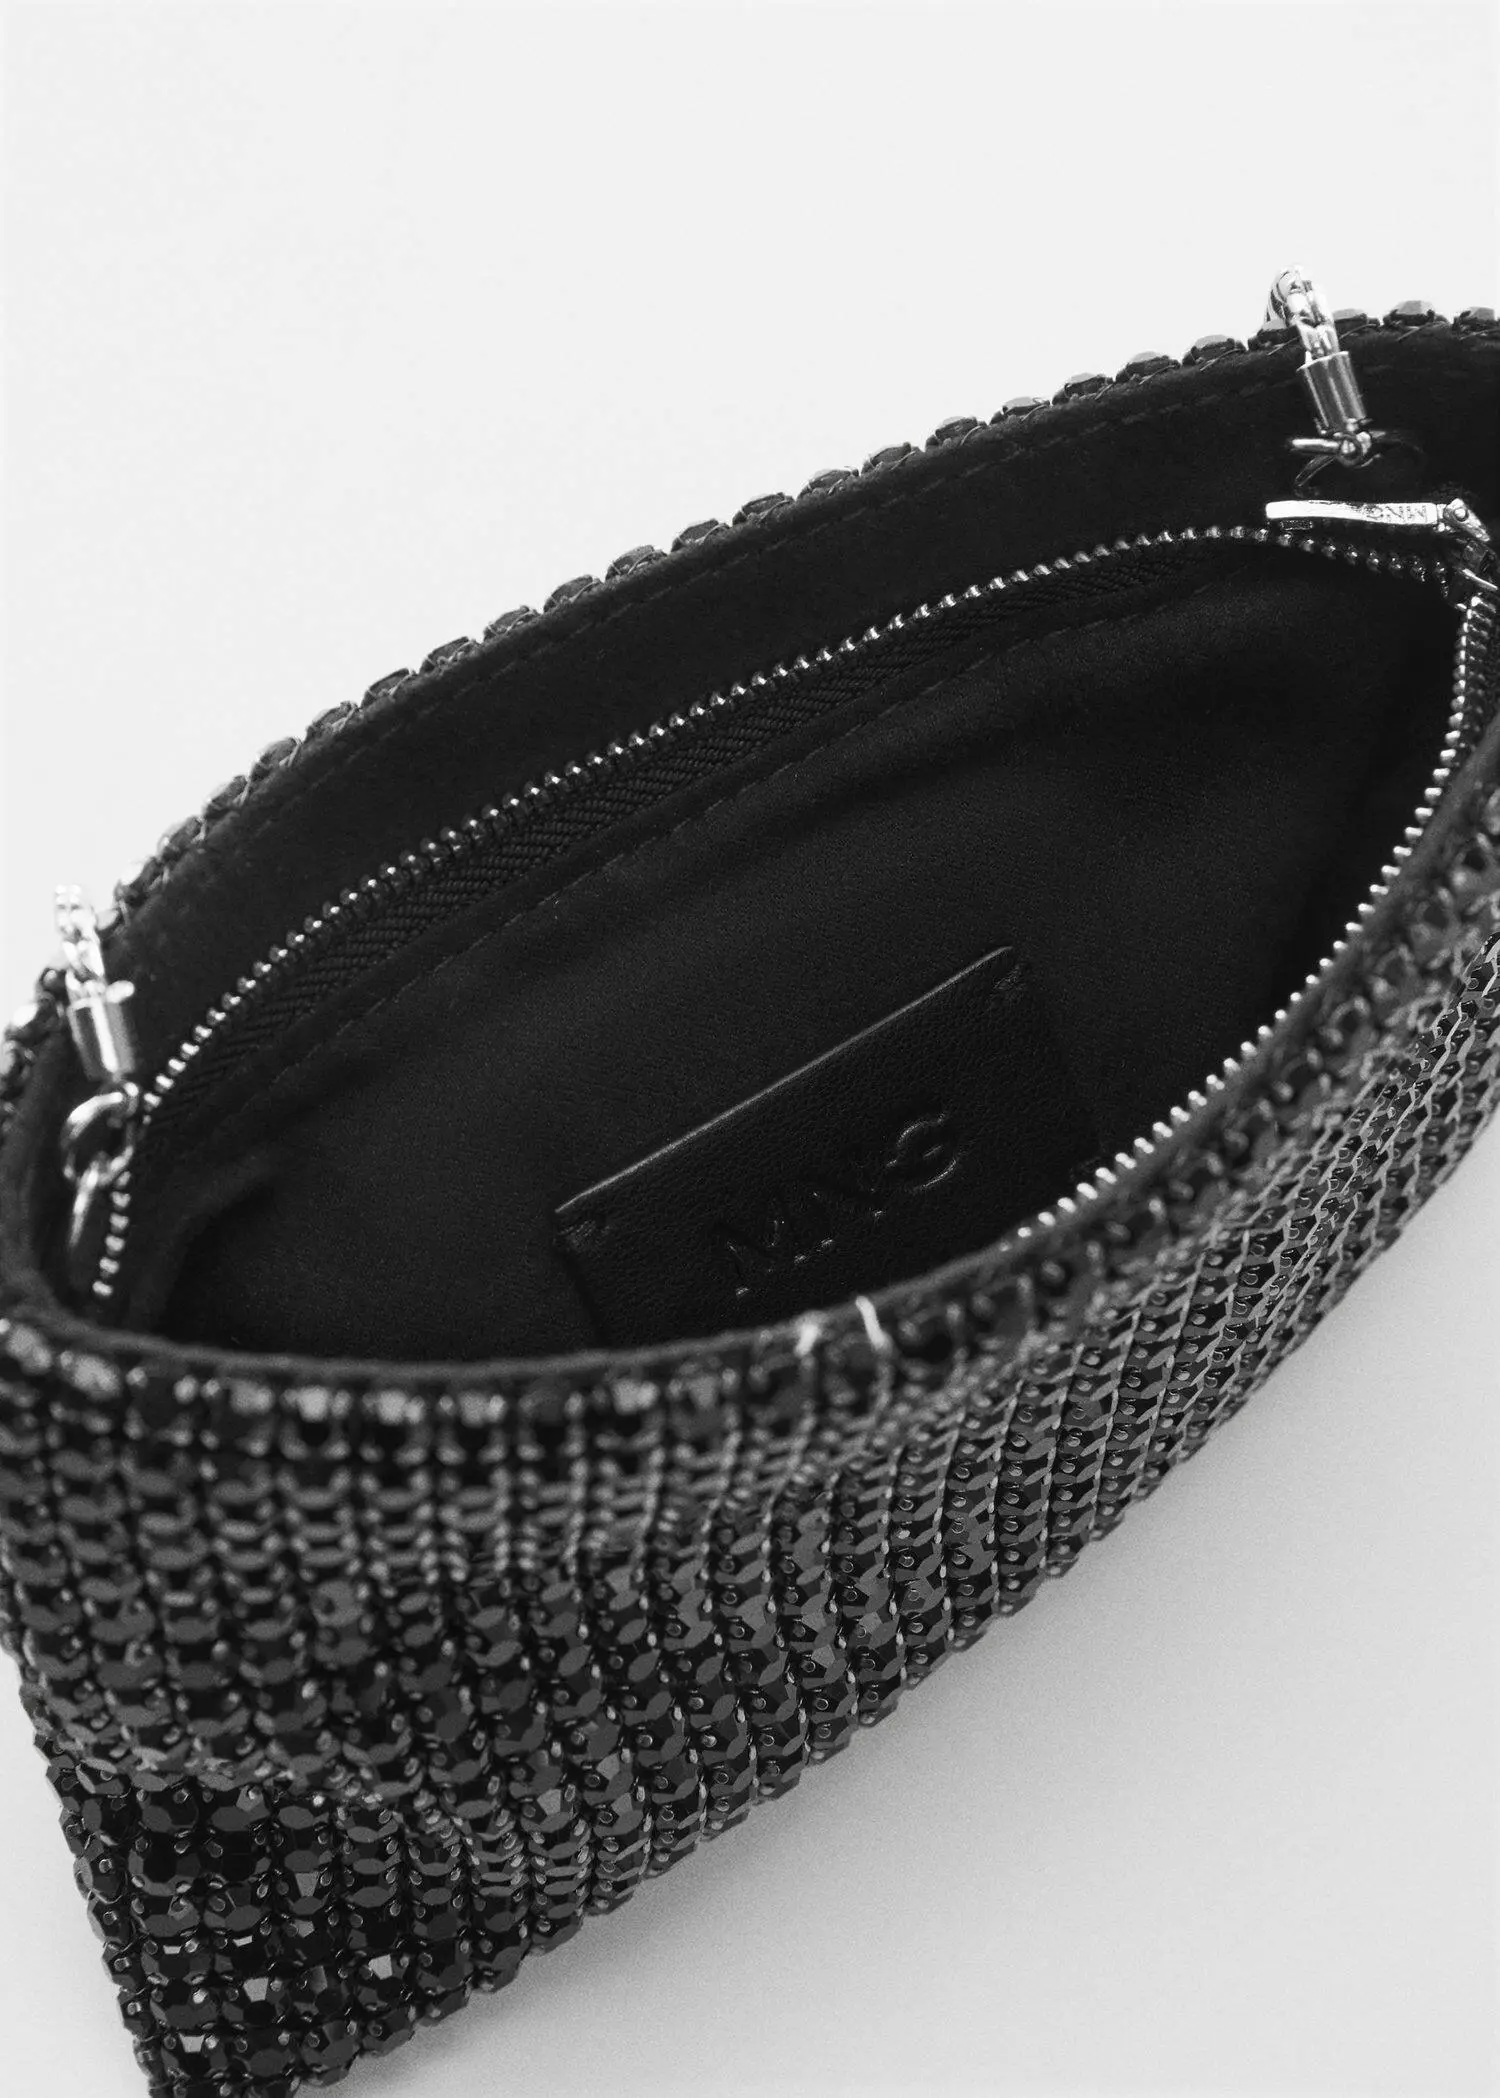 Mango Chain bag with crystals. 2